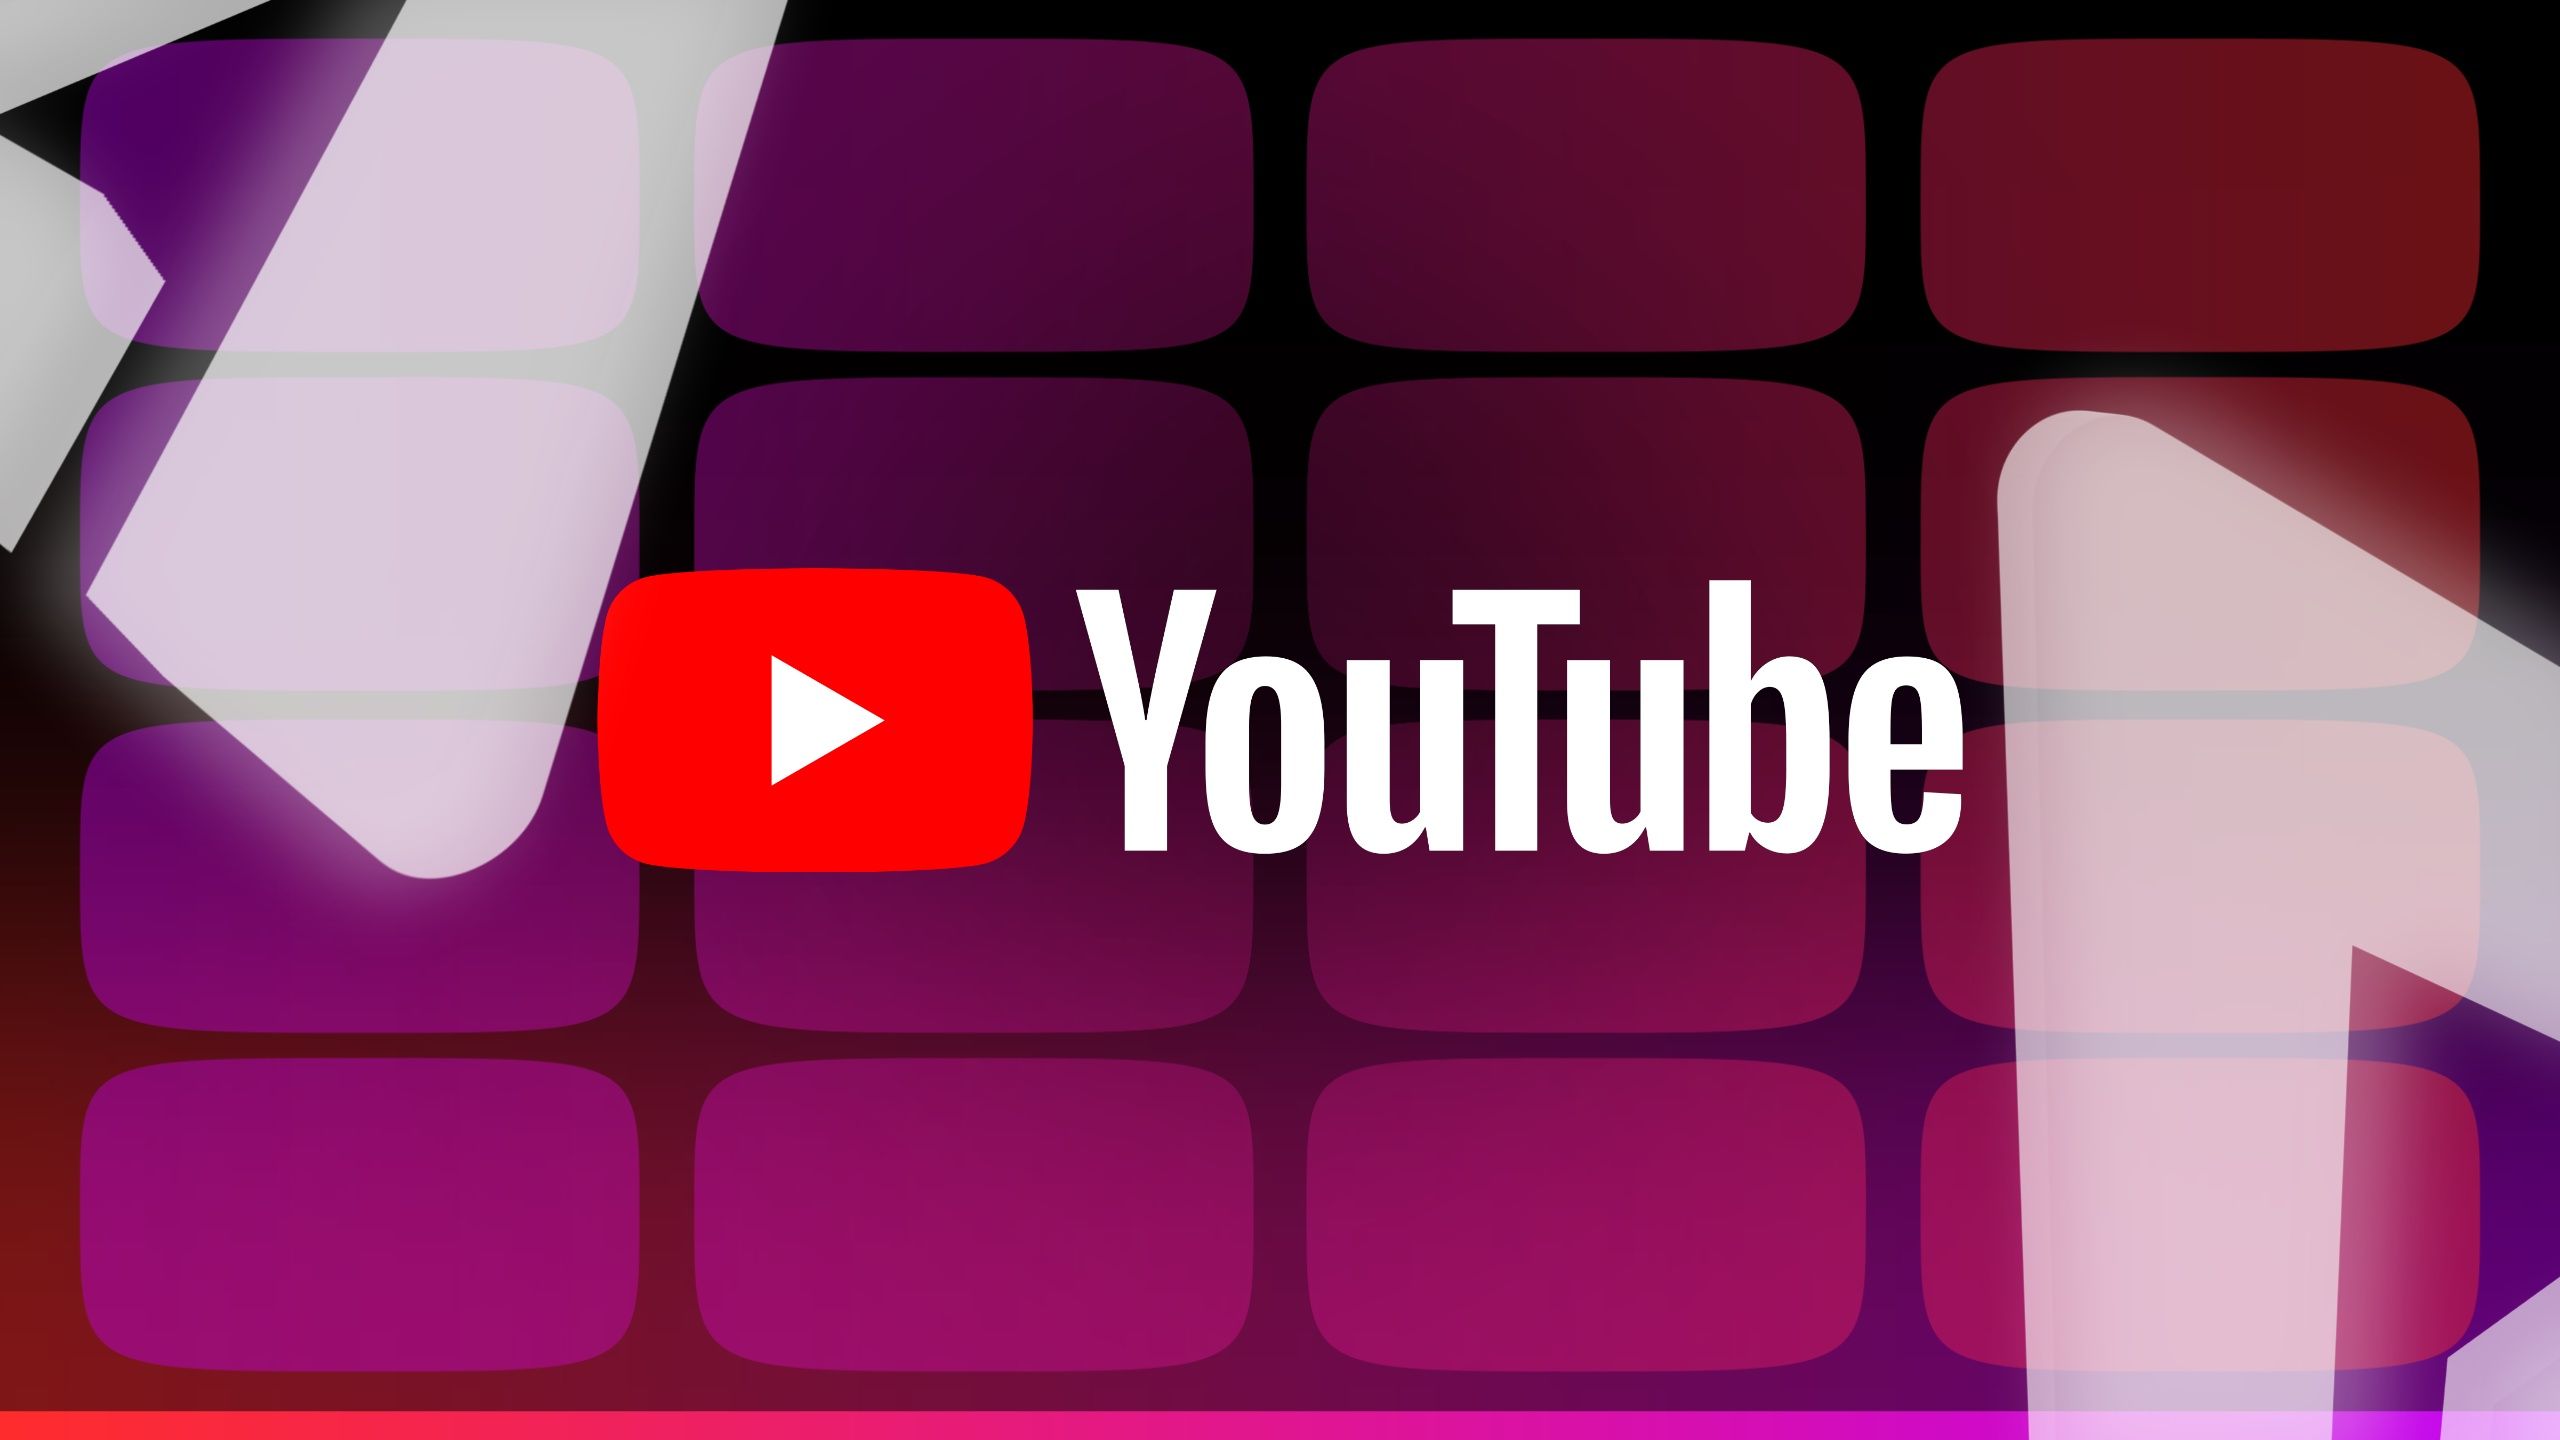 The YouTube logo against a magenta background